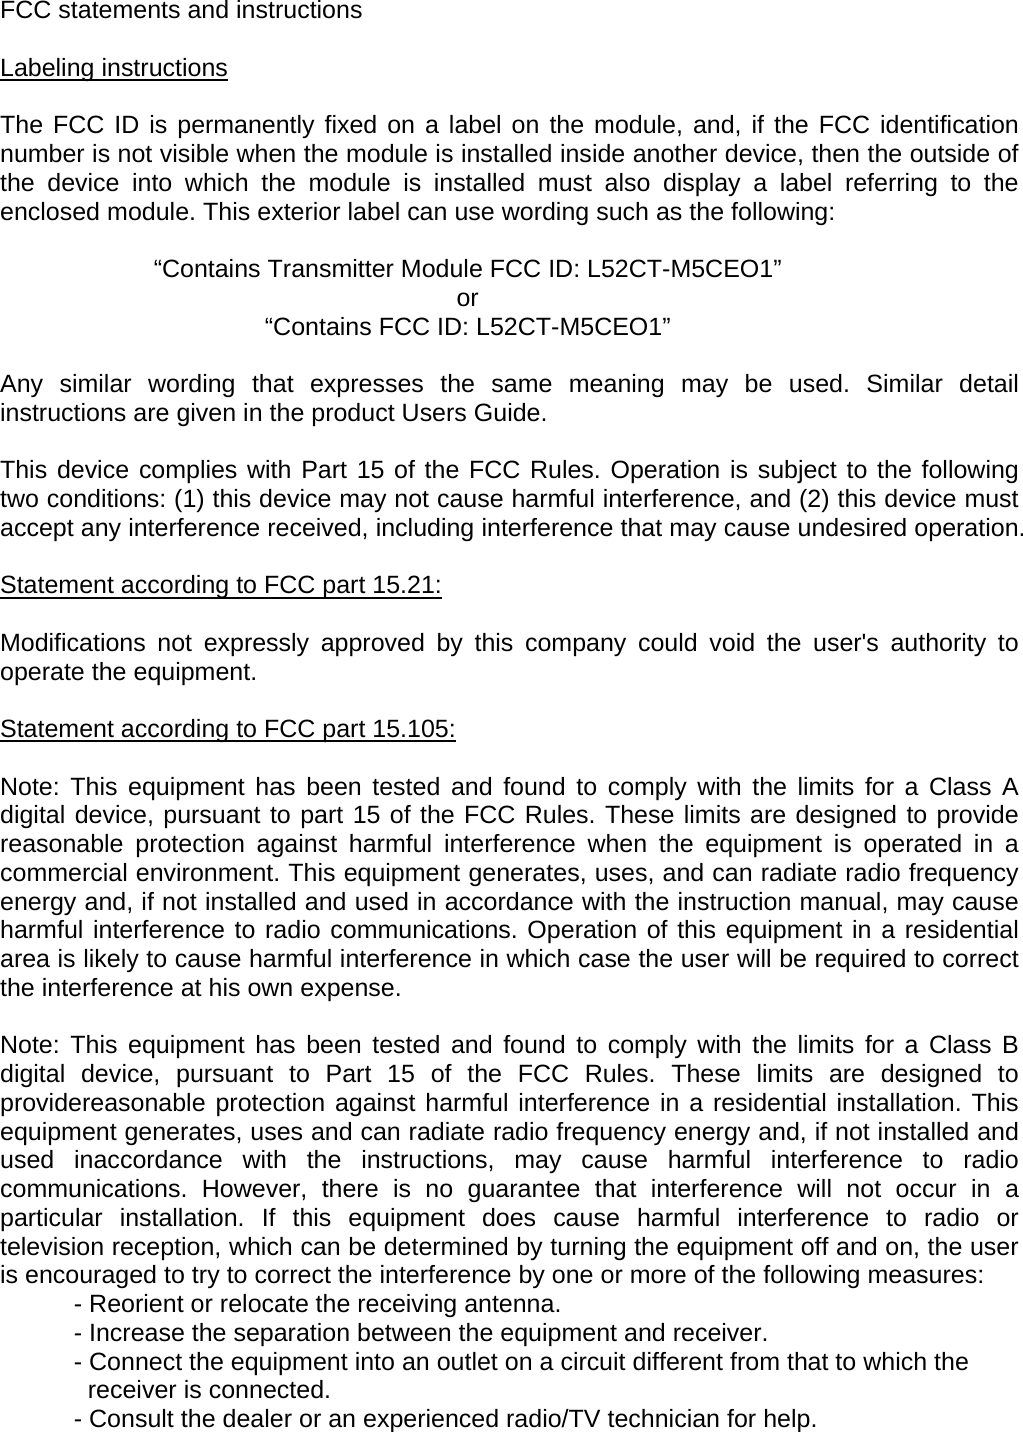 FCC statements and instructions   Labeling instructions  The FCC ID is permanently fixed on a label on the module, and, if the FCC identification number is not visible when the module is installed inside another device, then the outside of the device into which the module is installed must also display a label referring to the enclosed module. This exterior label can use wording such as the following:      “Contains Transmitter Module FCC ID: L52CT-M5CEO1”   or     “Contains FCC ID: L52CT-M5CEO1”   Any similar wording that expresses the same meaning may be used. Similar detail instructions are given in the product Users Guide.    This device complies with Part 15 of the FCC Rules. Operation is subject to the following two conditions: (1) this device may not cause harmful interference, and (2) this device must accept any interference received, including interference that may cause undesired operation.   Statement according to FCC part 15.21:  Modifications not expressly approved by this company could void the user&apos;s authority to operate the equipment.   Statement according to FCC part 15.105:  Note: This equipment has been tested and found to comply with the limits for a Class A digital device, pursuant to part 15 of the FCC Rules. These limits are designed to provide reasonable protection against harmful interference when the equipment is operated in a commercial environment. This equipment generates, uses, and can radiate radio frequency energy and, if not installed and used in accordance with the instruction manual, may cause harmful interference to radio communications. Operation of this equipment in a residential area is likely to cause harmful interference in which case the user will be required to correct the interference at his own expense.   Note: This equipment has been tested and found to comply with the limits for a Class B digital device, pursuant to Part 15 of the FCC Rules. These limits are designed to providereasonable protection against harmful interference in a residential installation. This equipment generates, uses and can radiate radio frequency energy and, if not installed and used inaccordance with the instructions, may cause harmful interference to radio communications. However, there is no guarantee that interference will not occur in a particular installation. If this equipment does cause harmful interference to radio or television reception, which can be determined by turning the equipment off and on, the user is encouraged to try to correct the interference by one or more of the following measures: - Reorient or relocate the receiving antenna. - Increase the separation between the equipment and receiver. - Connect the equipment into an outlet on a circuit different from that to which the    receiver is connected. - Consult the dealer or an experienced radio/TV technician for help.   